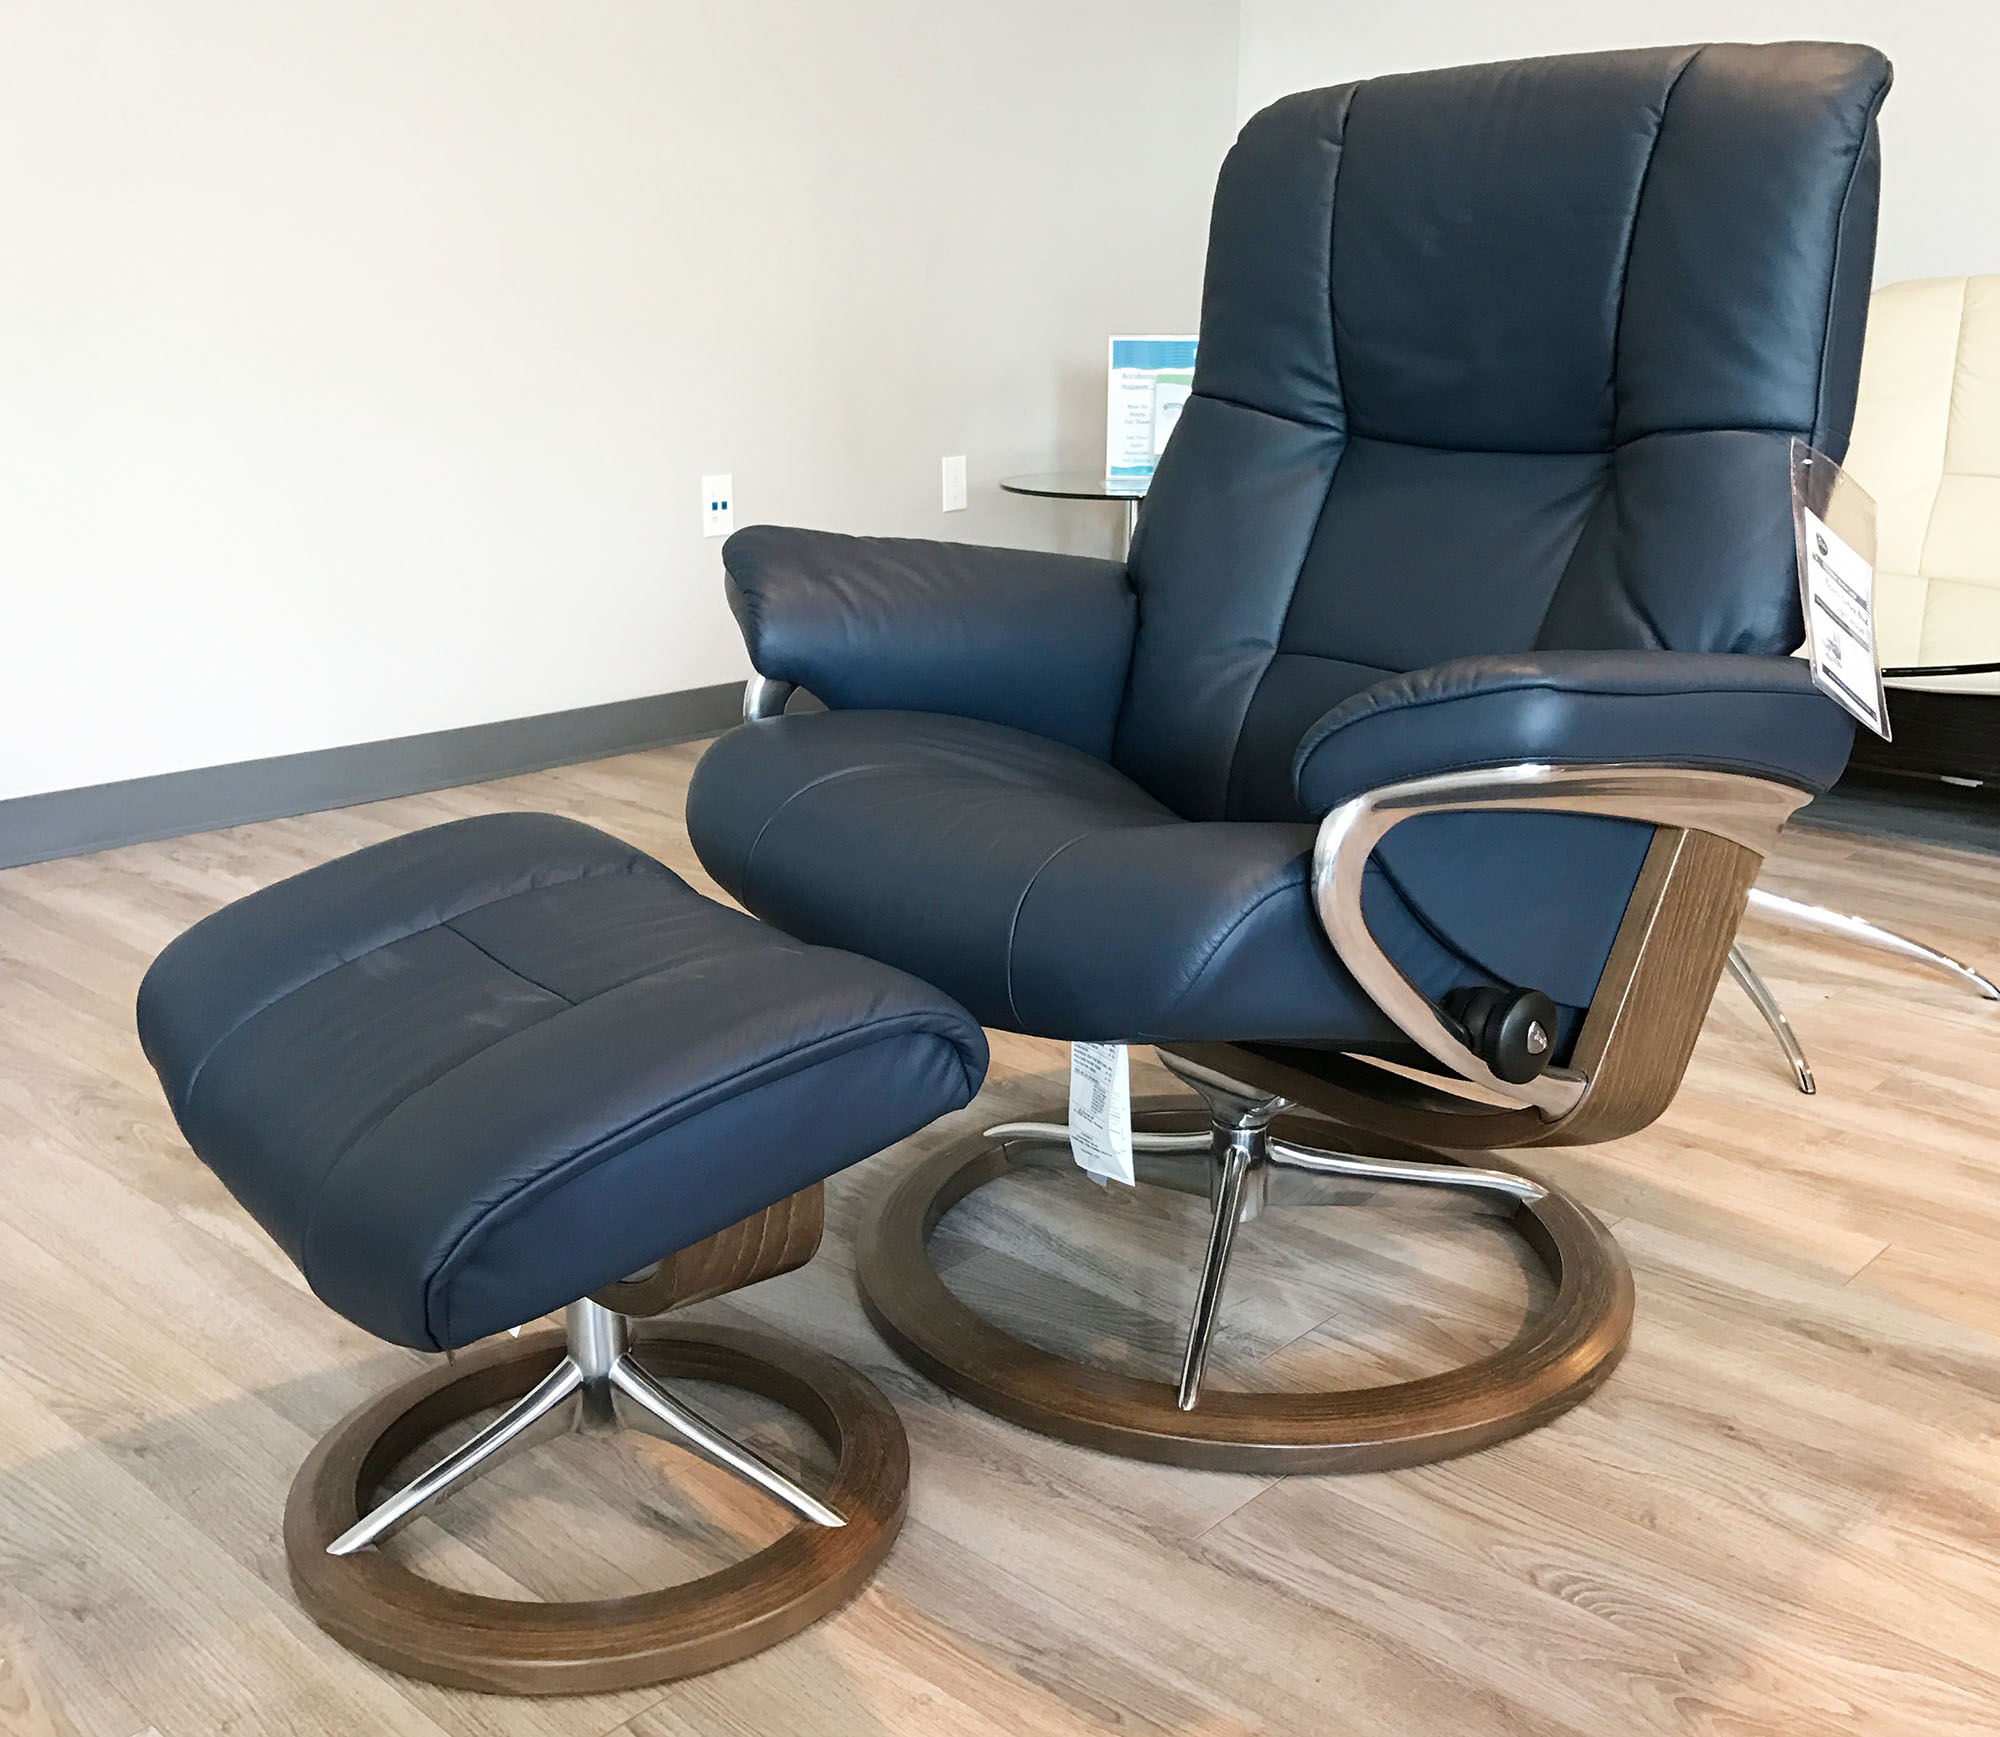 Stressless Mayfair Signature Walnut Wood Blue Ottoman Ekornes Chair Paloma Leather by Recliner and Oxford